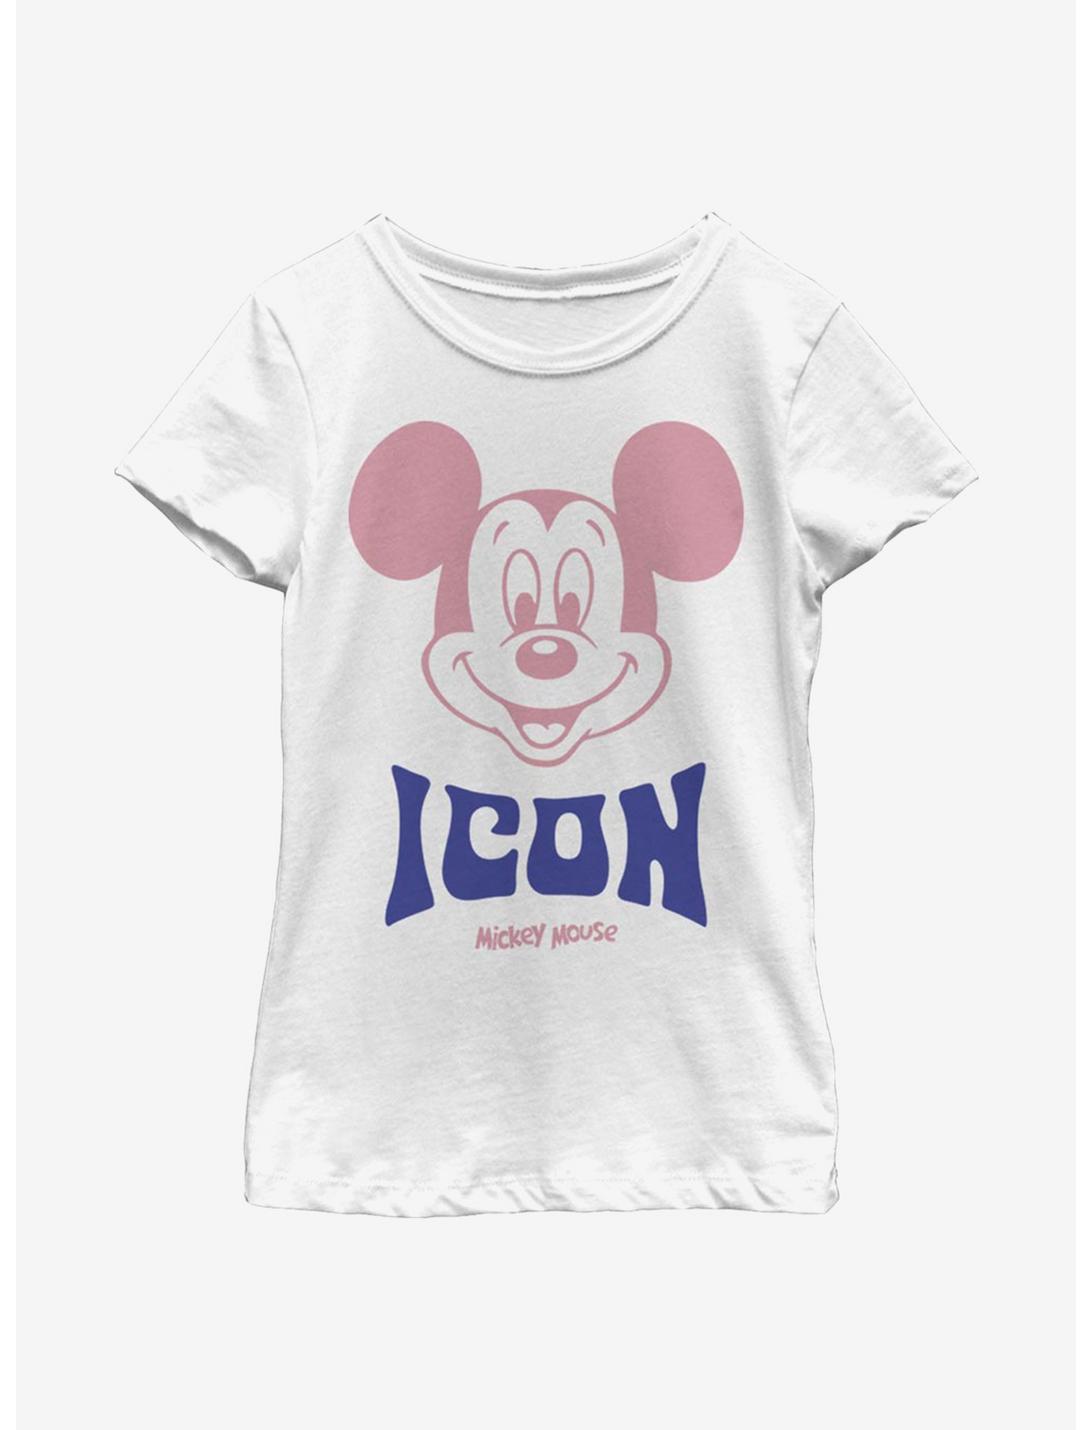 Disney Mickey Mouse Icon Youth Girls T-Shirt, WHITE, hi-res